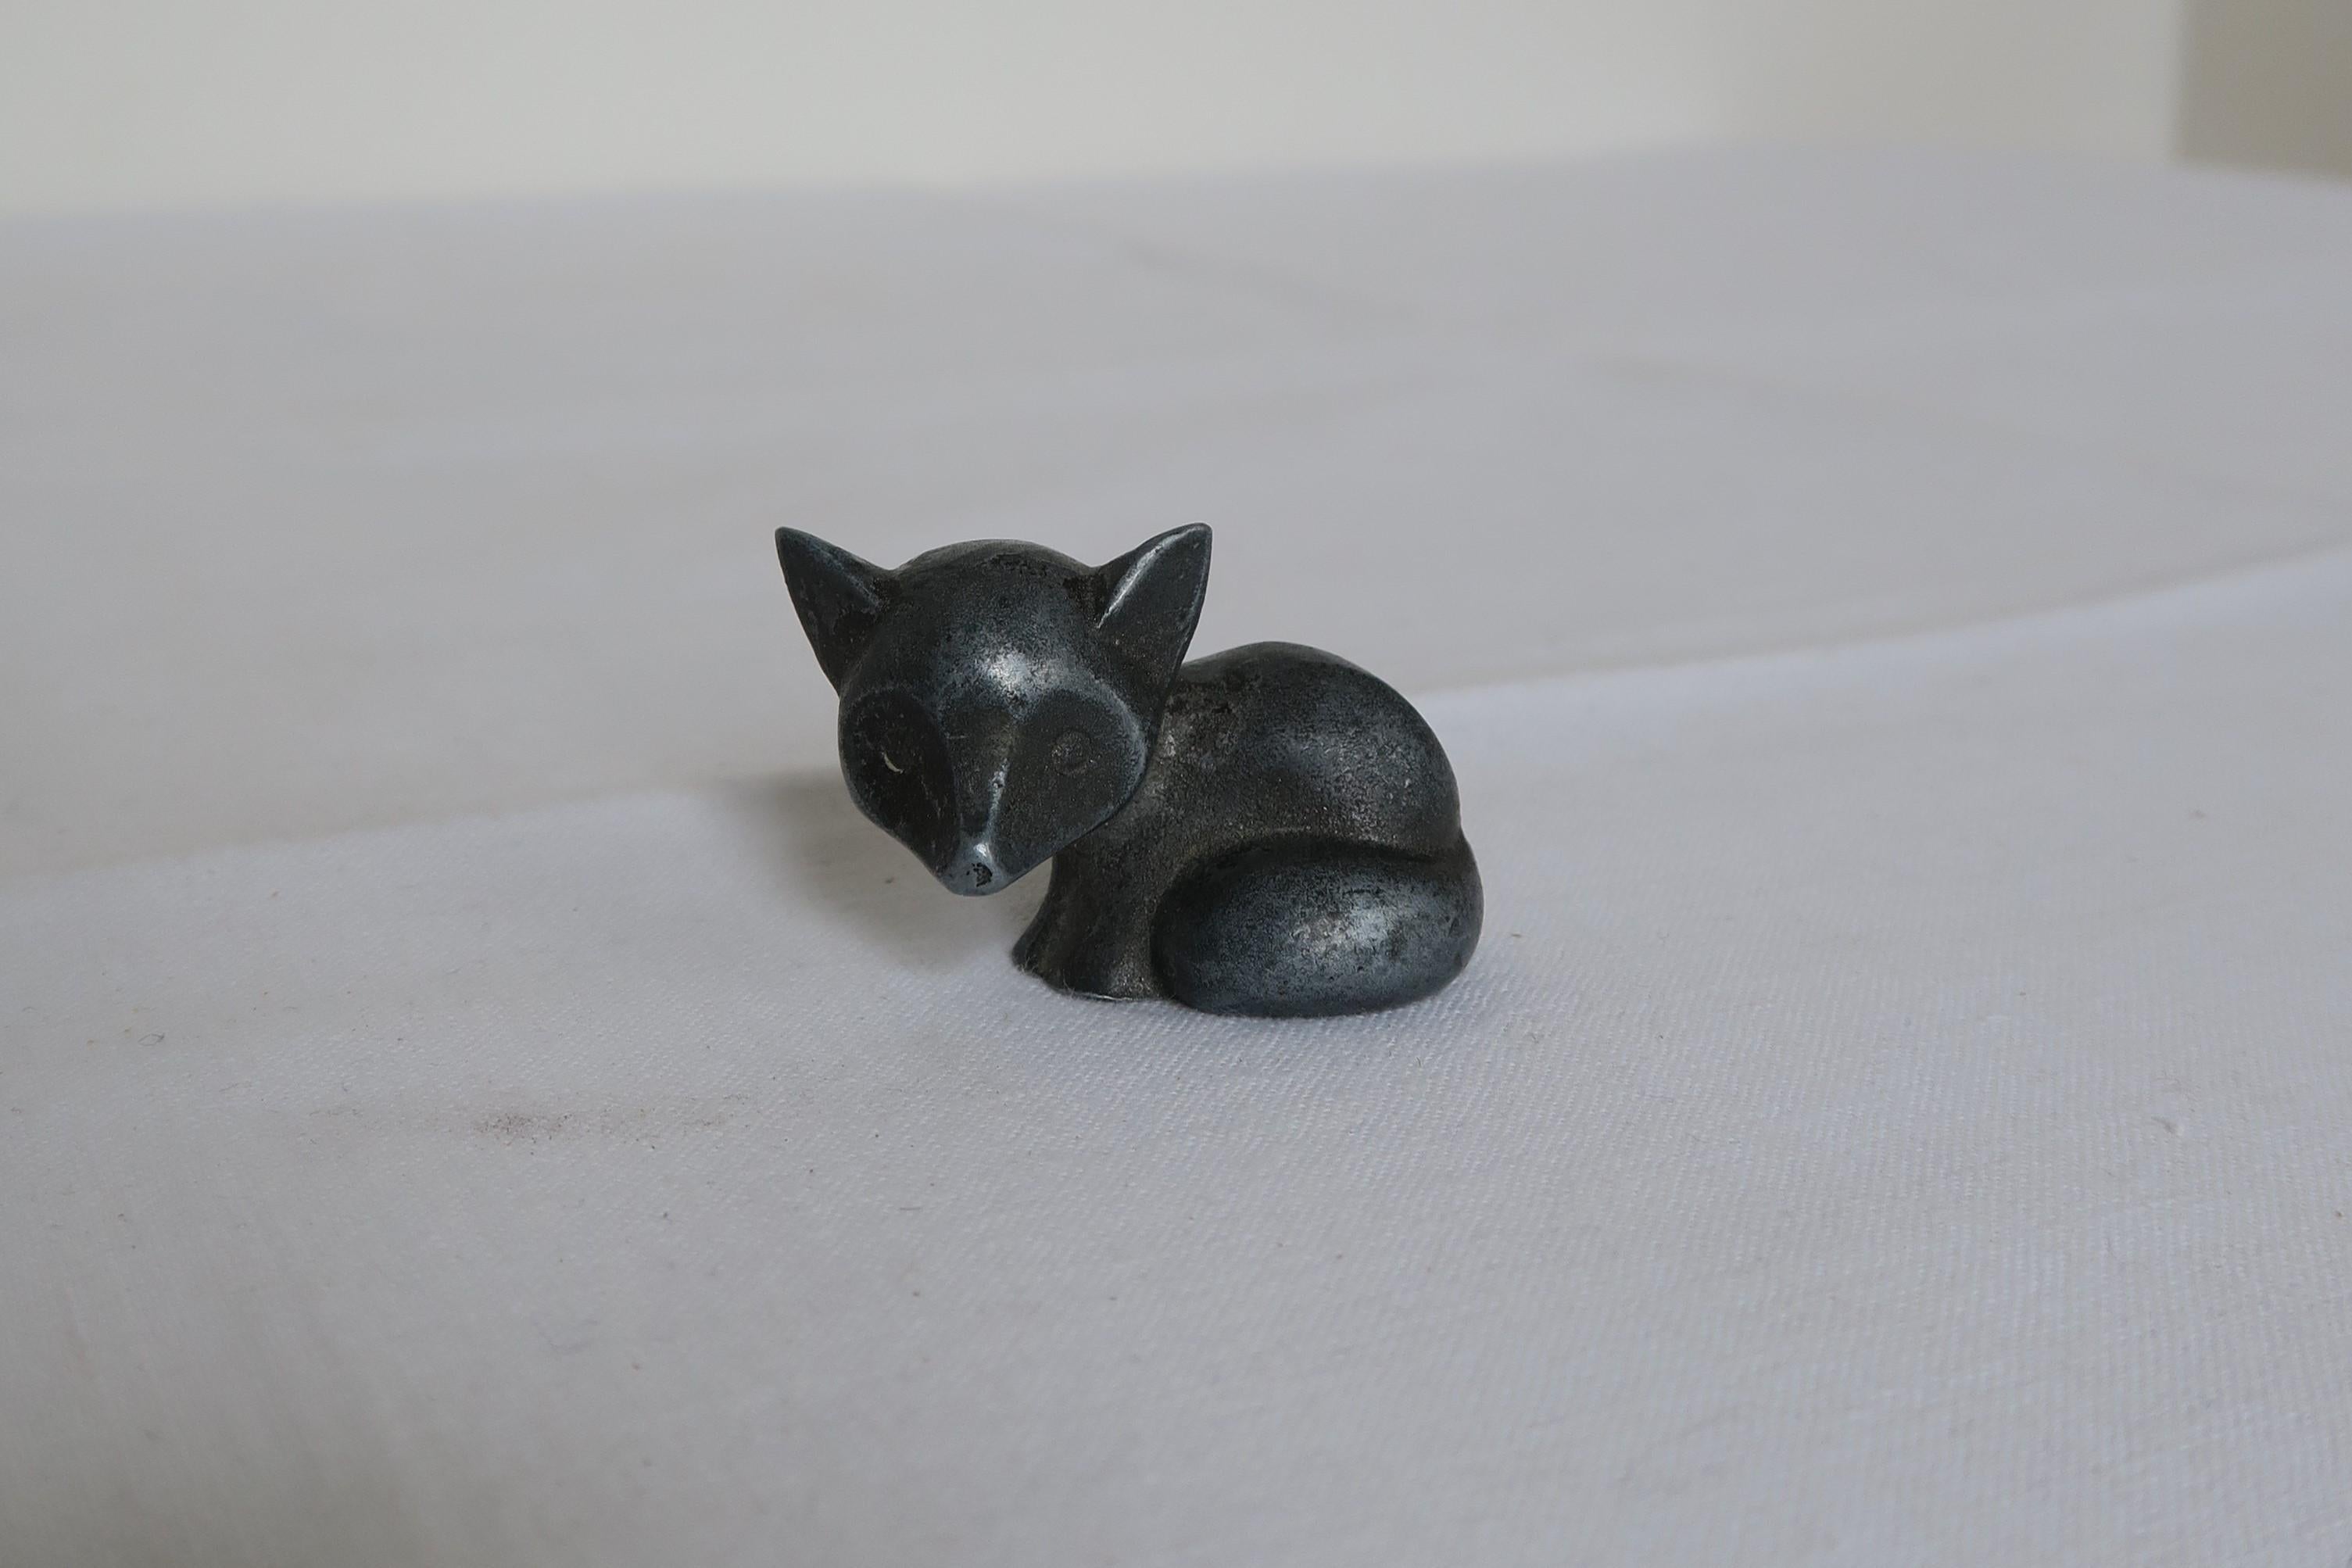 This sweet little fox miniature sculpture was made in 1940 by the Austrian Werkstätte Hagenauer. Usually these figurines would be made from brass, but all brass resources were needed in the production of arms due to the Second World War. The white